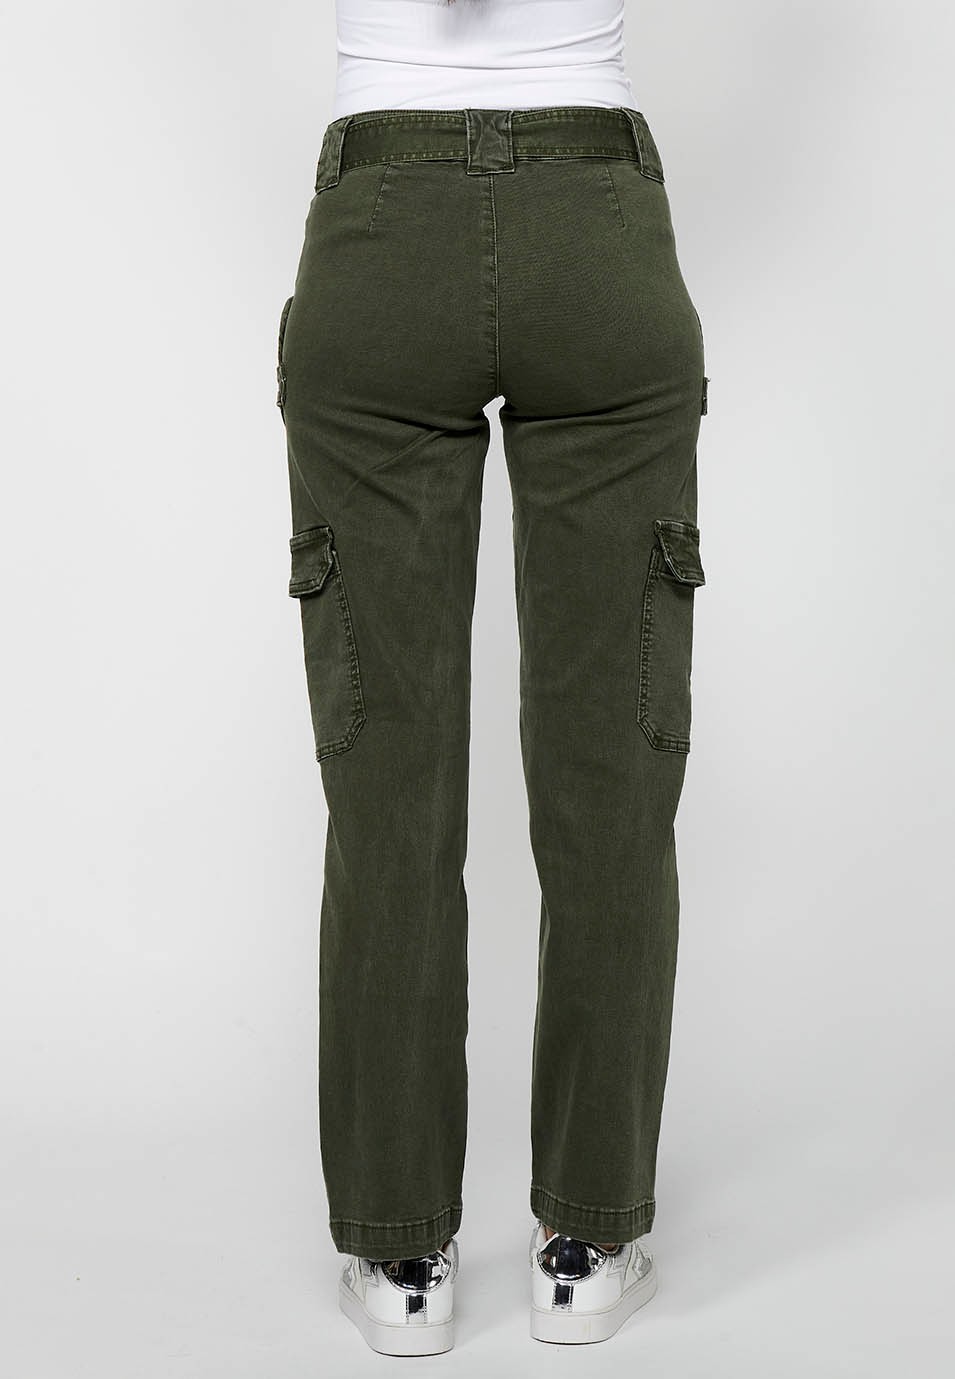 Long straight-cut pants with front zipper closure and button with patch pockets in Khaki Color for Women 1